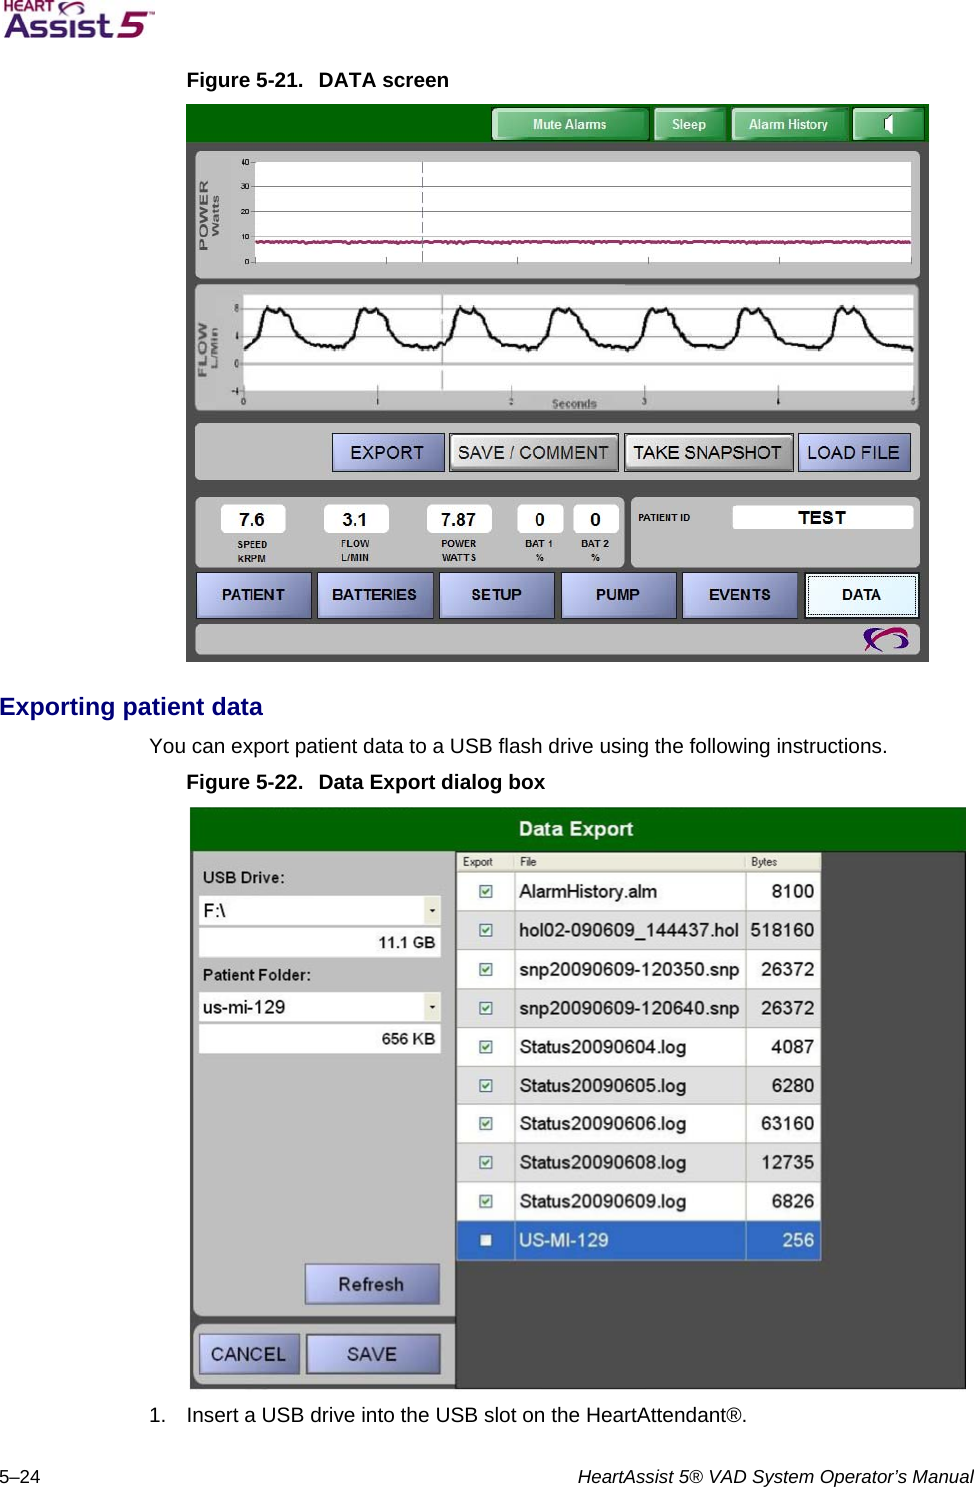   5–24  HeartAssist 5® VAD System Operator’s Manual  Figure 5-21.  DATA screen   Exporting patient data  You can export patient data to a USB flash drive using the following instructions.  Figure 5-22.  Data Export dialog box   1.  Insert a USB drive into the USB slot on the HeartAttendant®.  